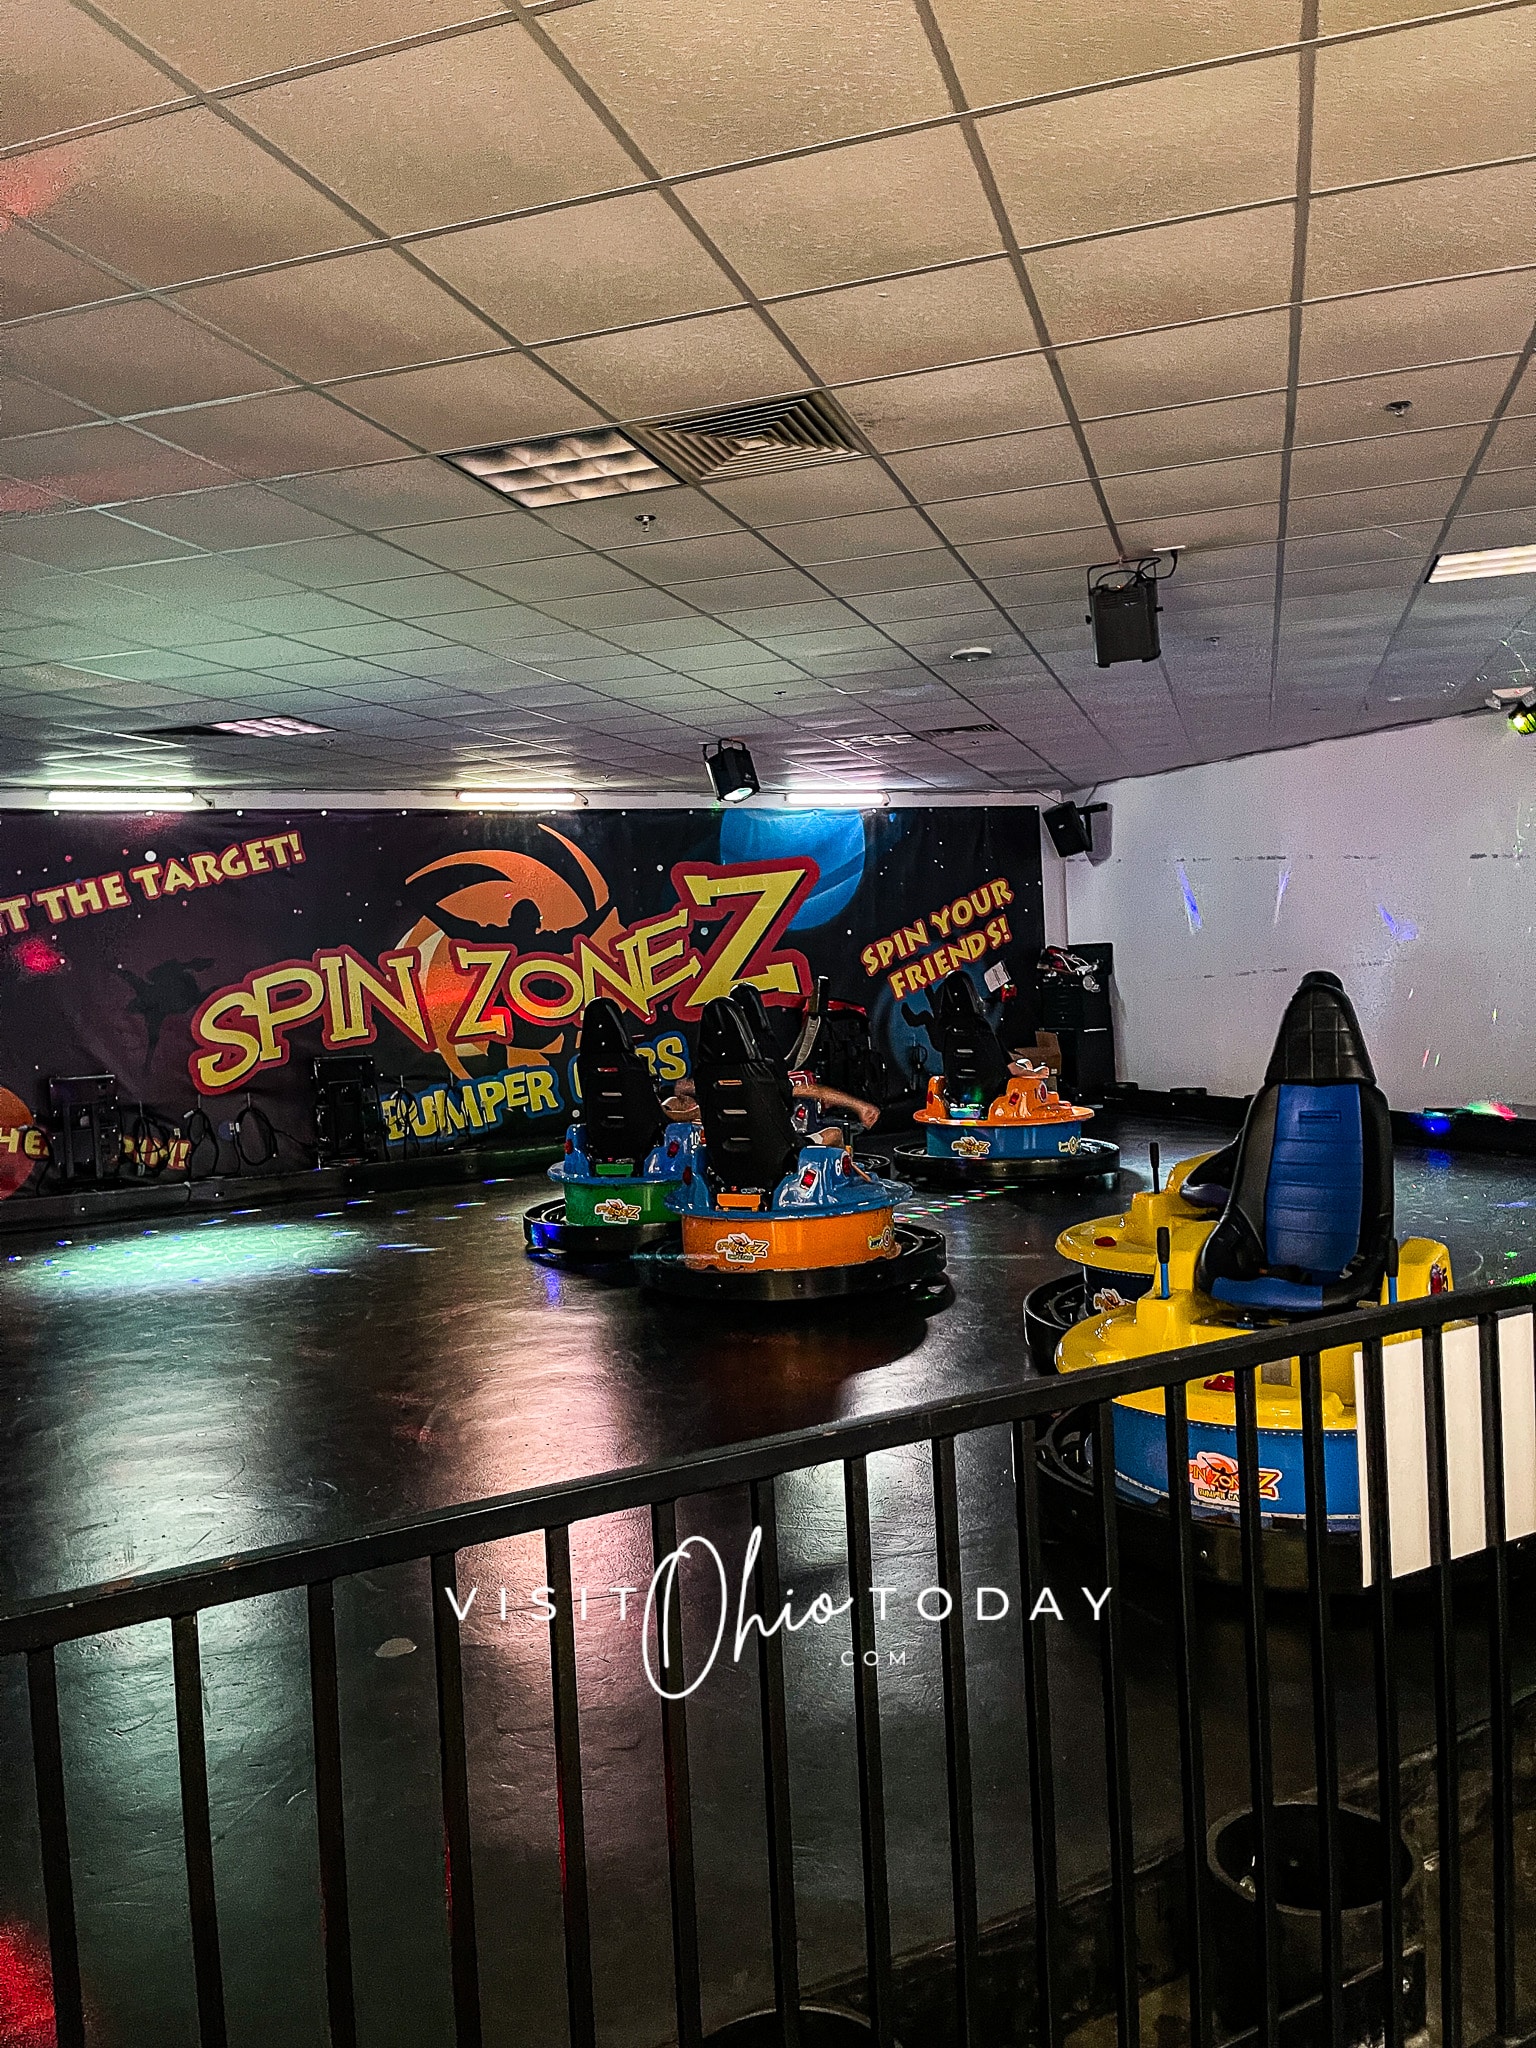 Vertical photo showing the spin zone bumper cars in their arena with 3 occupied cars